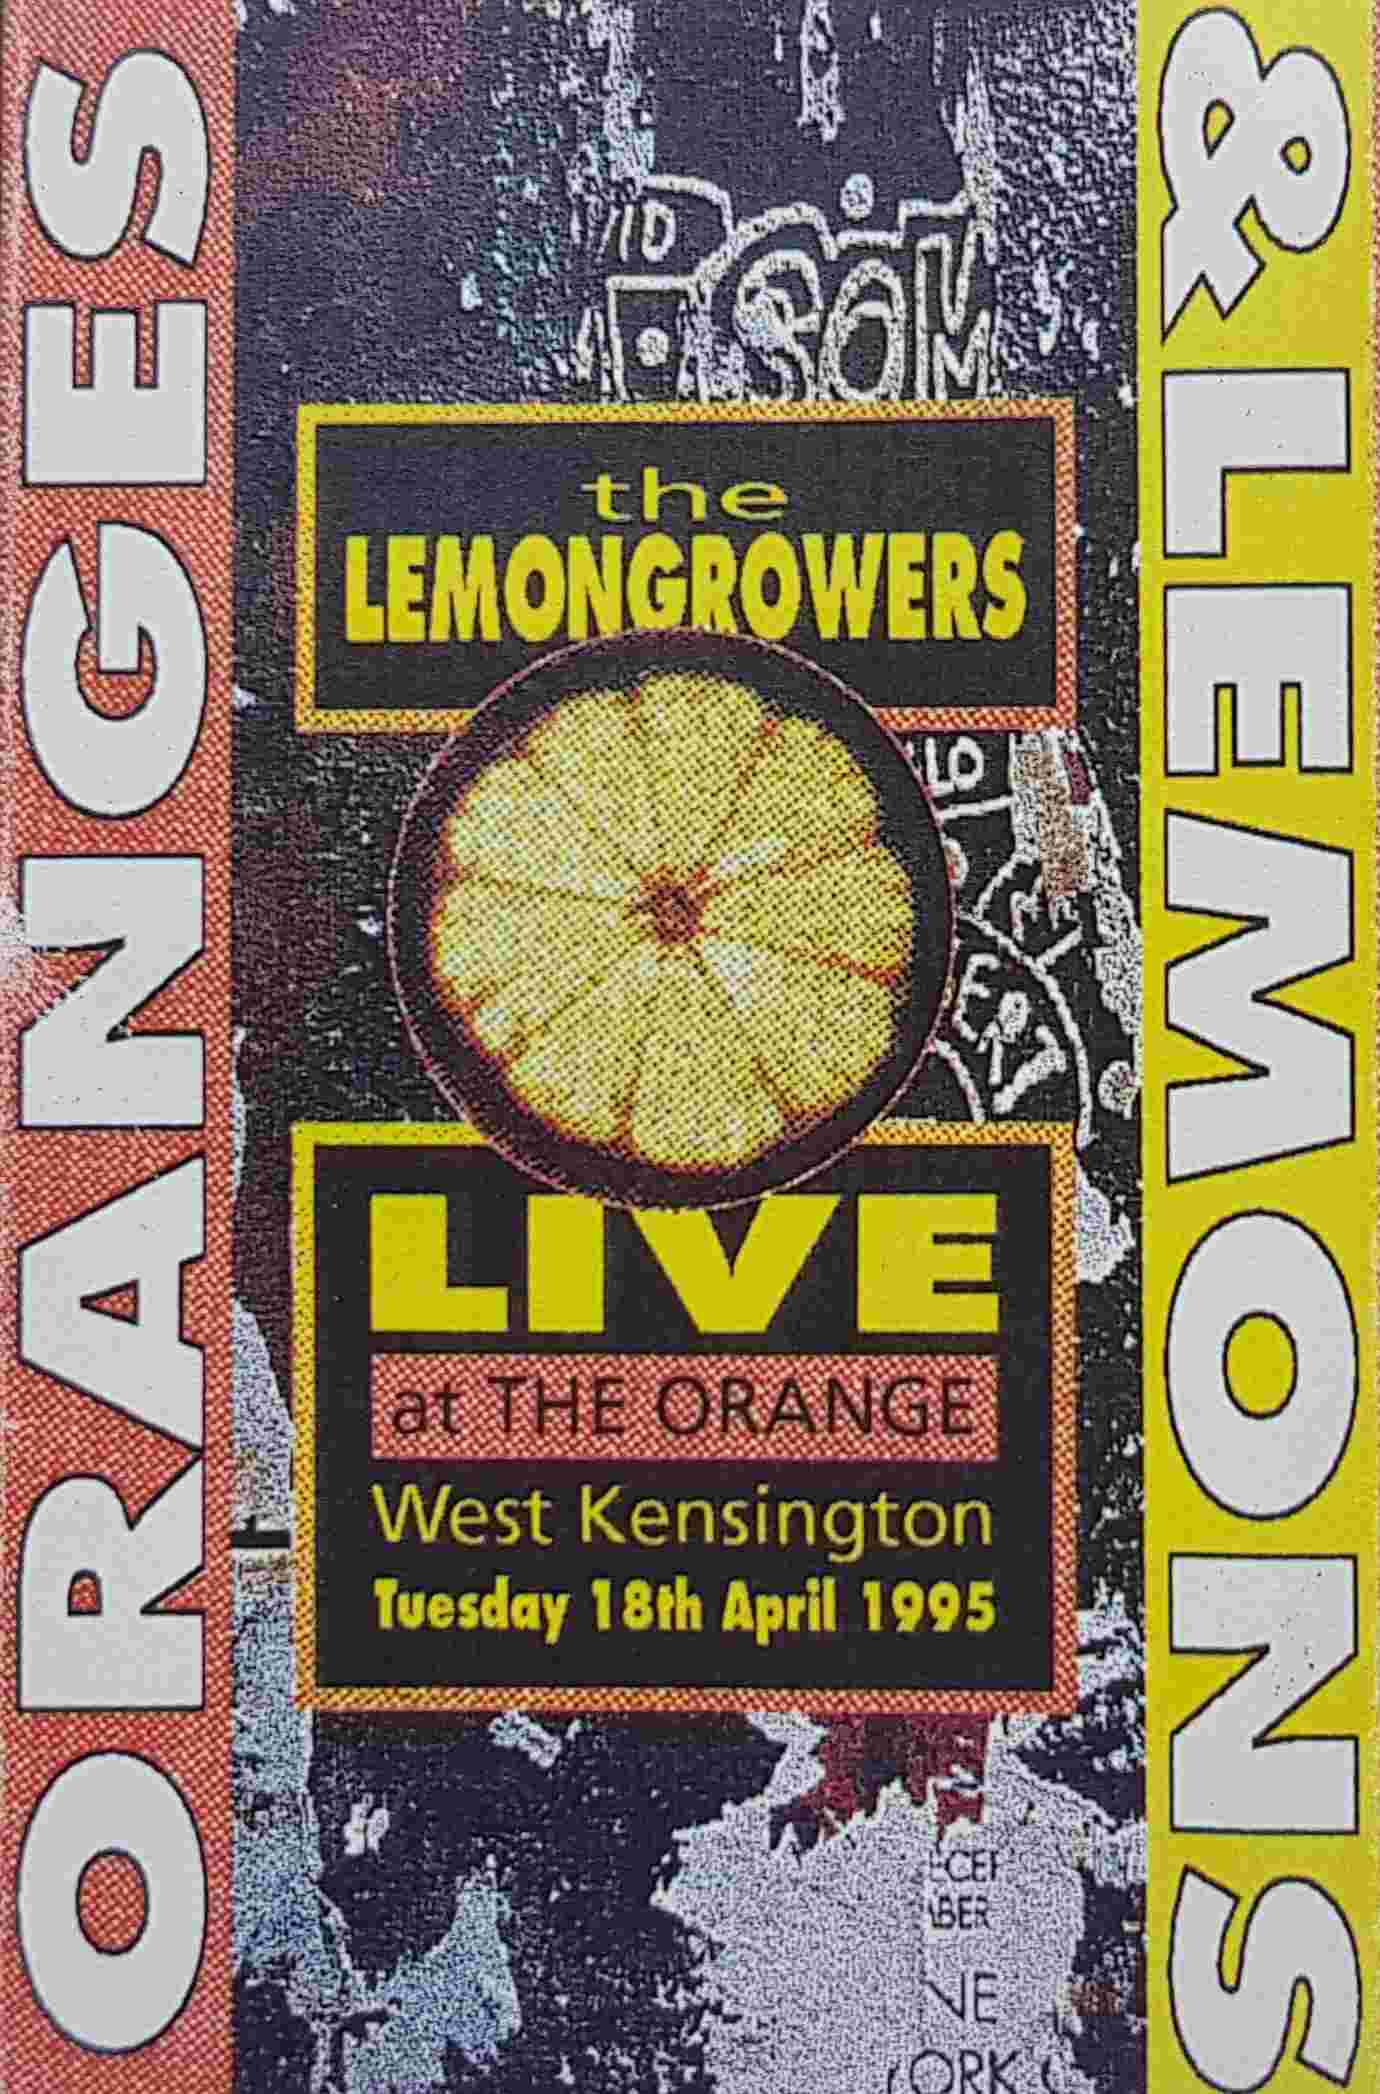 Picture of cassettes-LGOALT Oranges and lemons - Live (20 only) by artist The Lemon Growers 